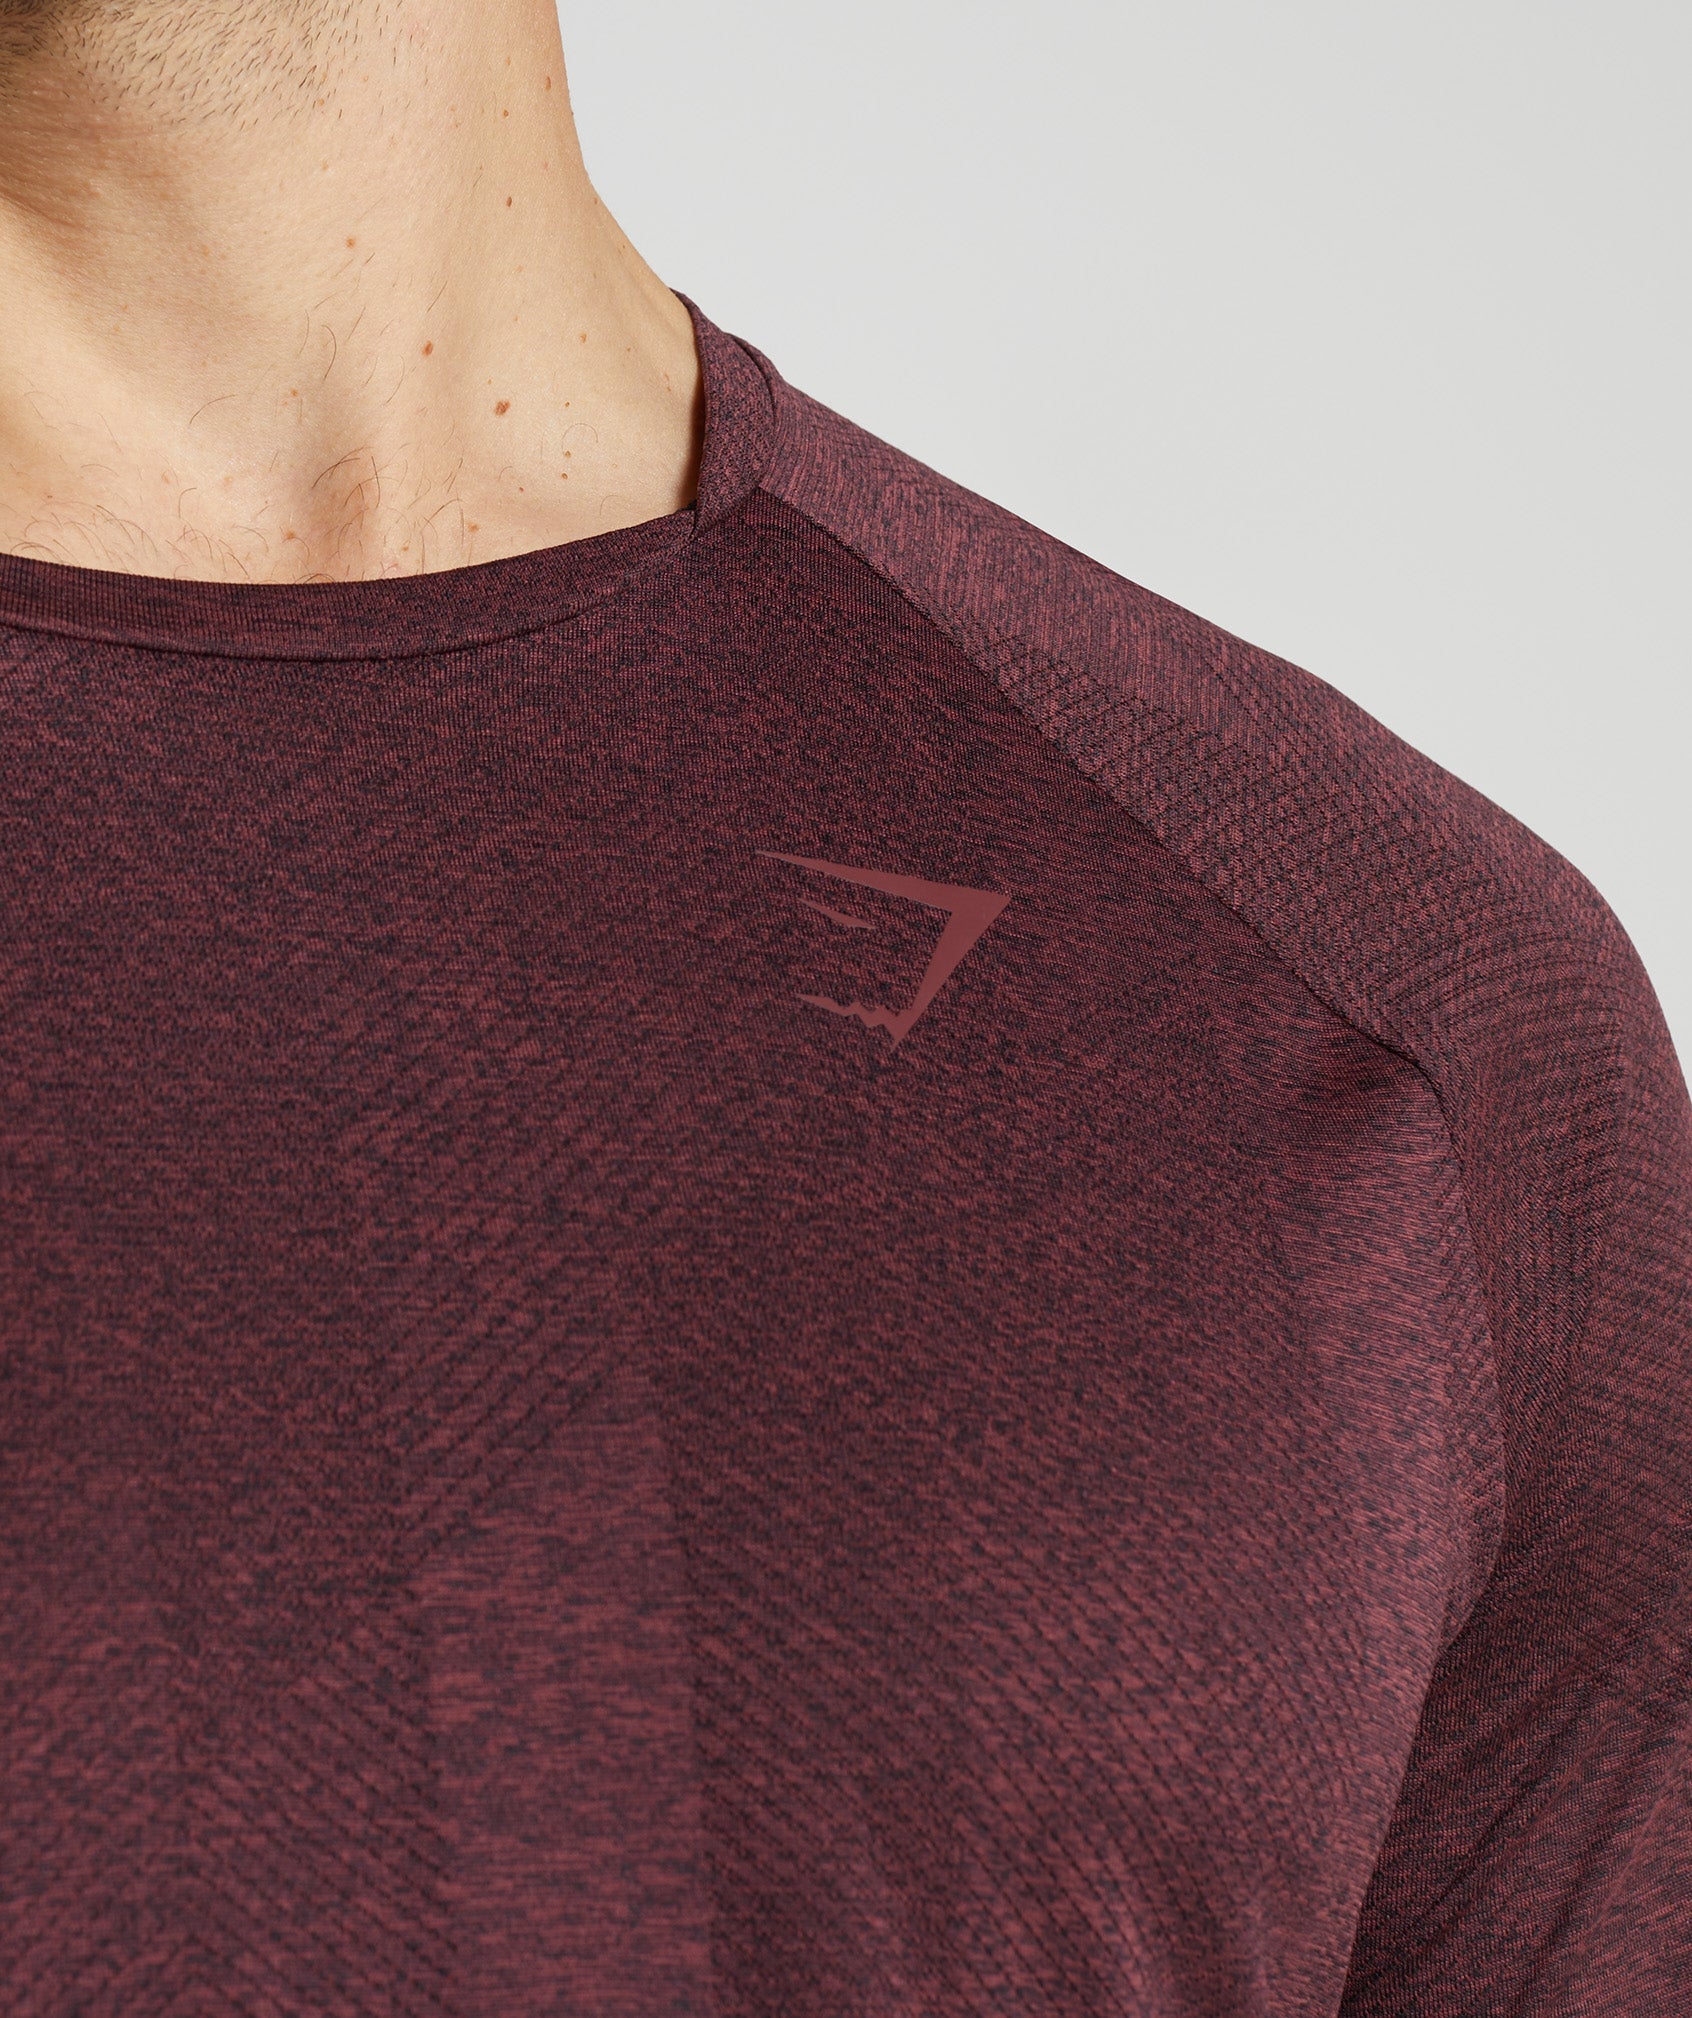 Apex Long Sleeve T-Shirt in Cherry Brown